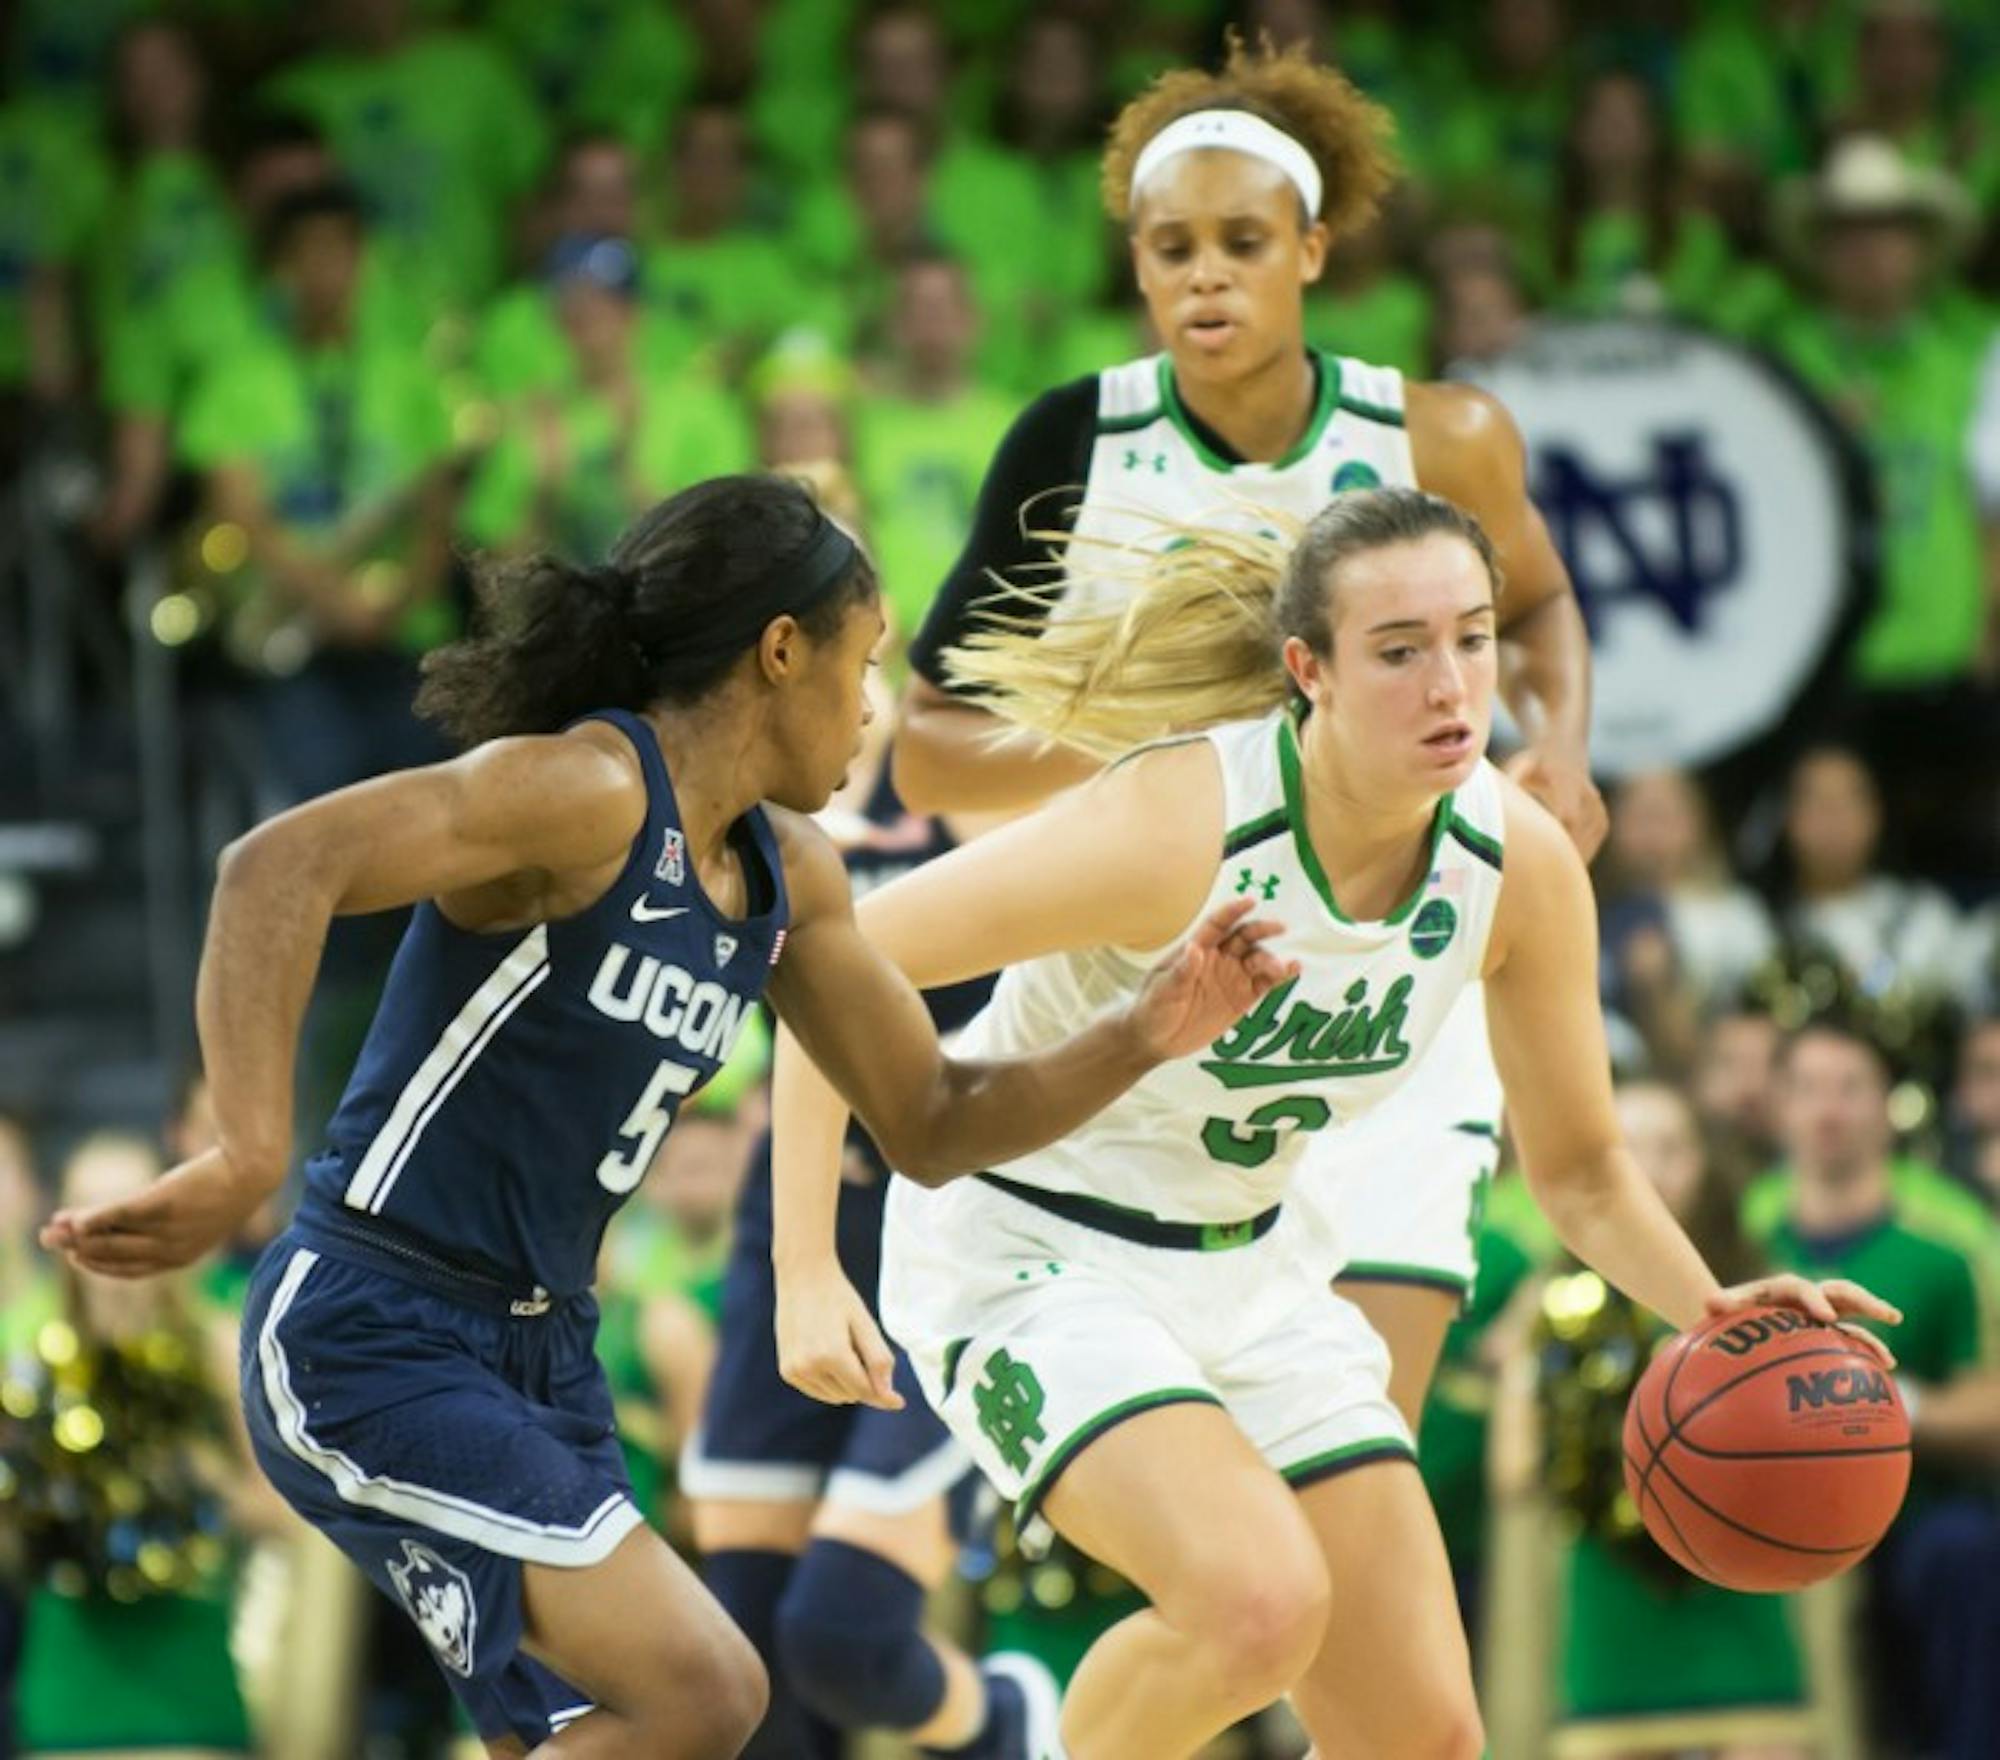 Irish sophomore guard Marina Mabrey attempts to dribble by a UConn defender in Notre Dame's loss to the Huskies on Wednesday at Purcell Pavilion.